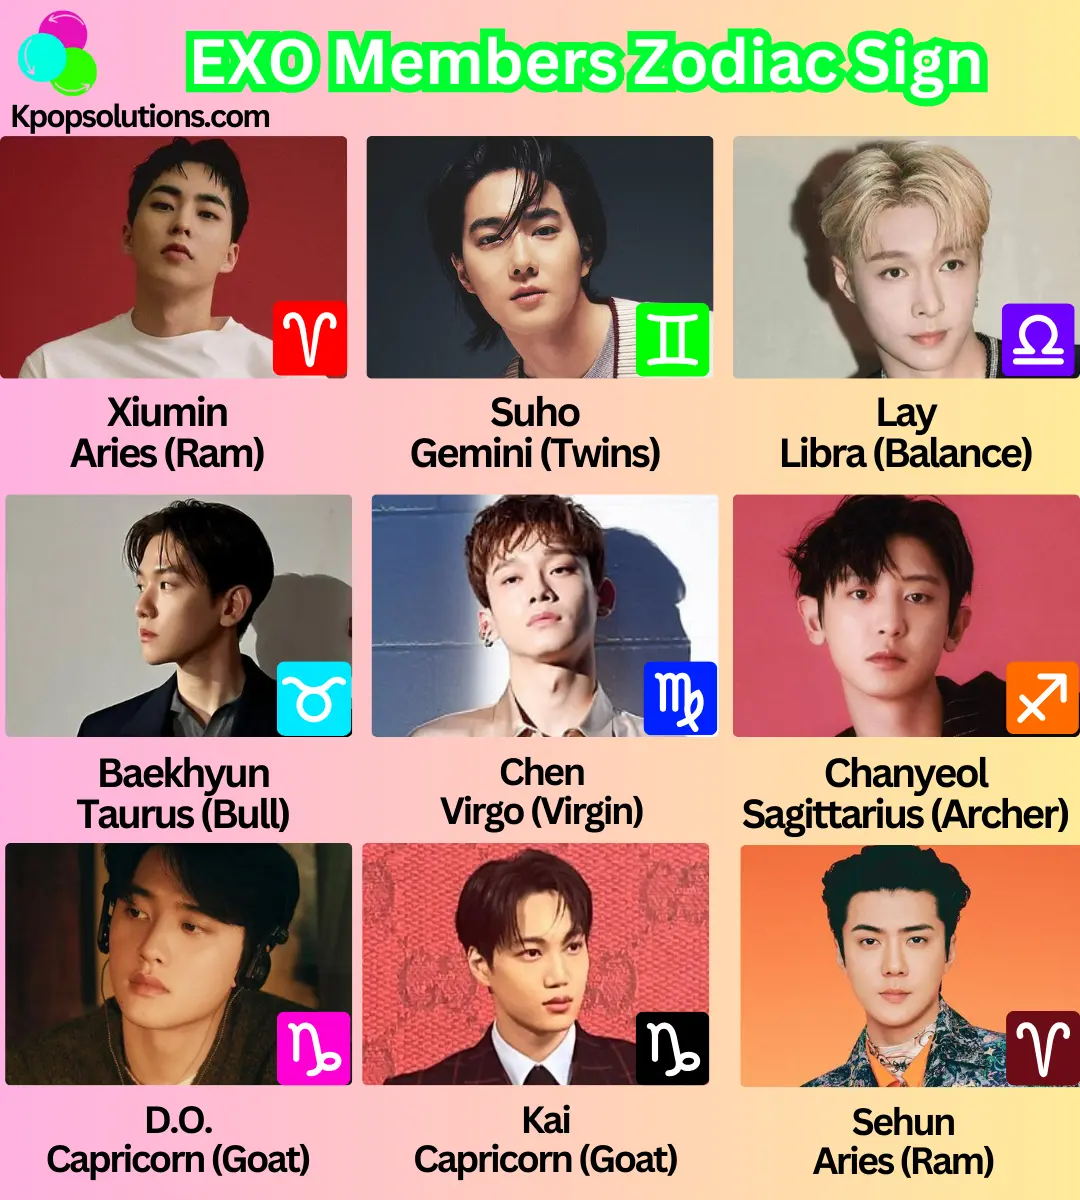 EXO Members' Zodiac Sign for Xiumin, Suho, Lay, Baekhyun, Chen, Chanyeol, D.O., Kai, and Sehun, with its meaning and symbol in left to right order.